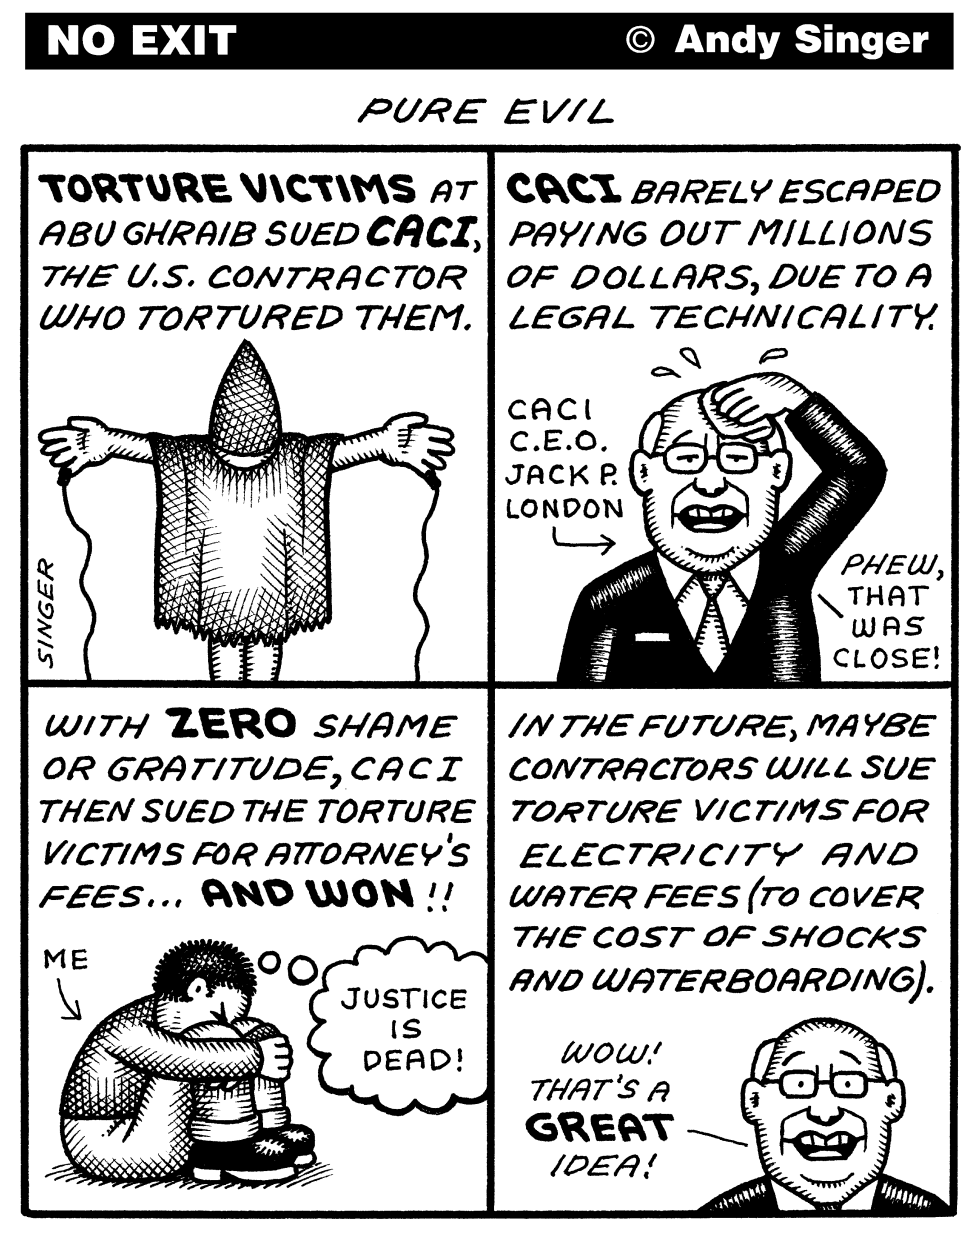  CACI CORPORATE EVIL by Andy Singer